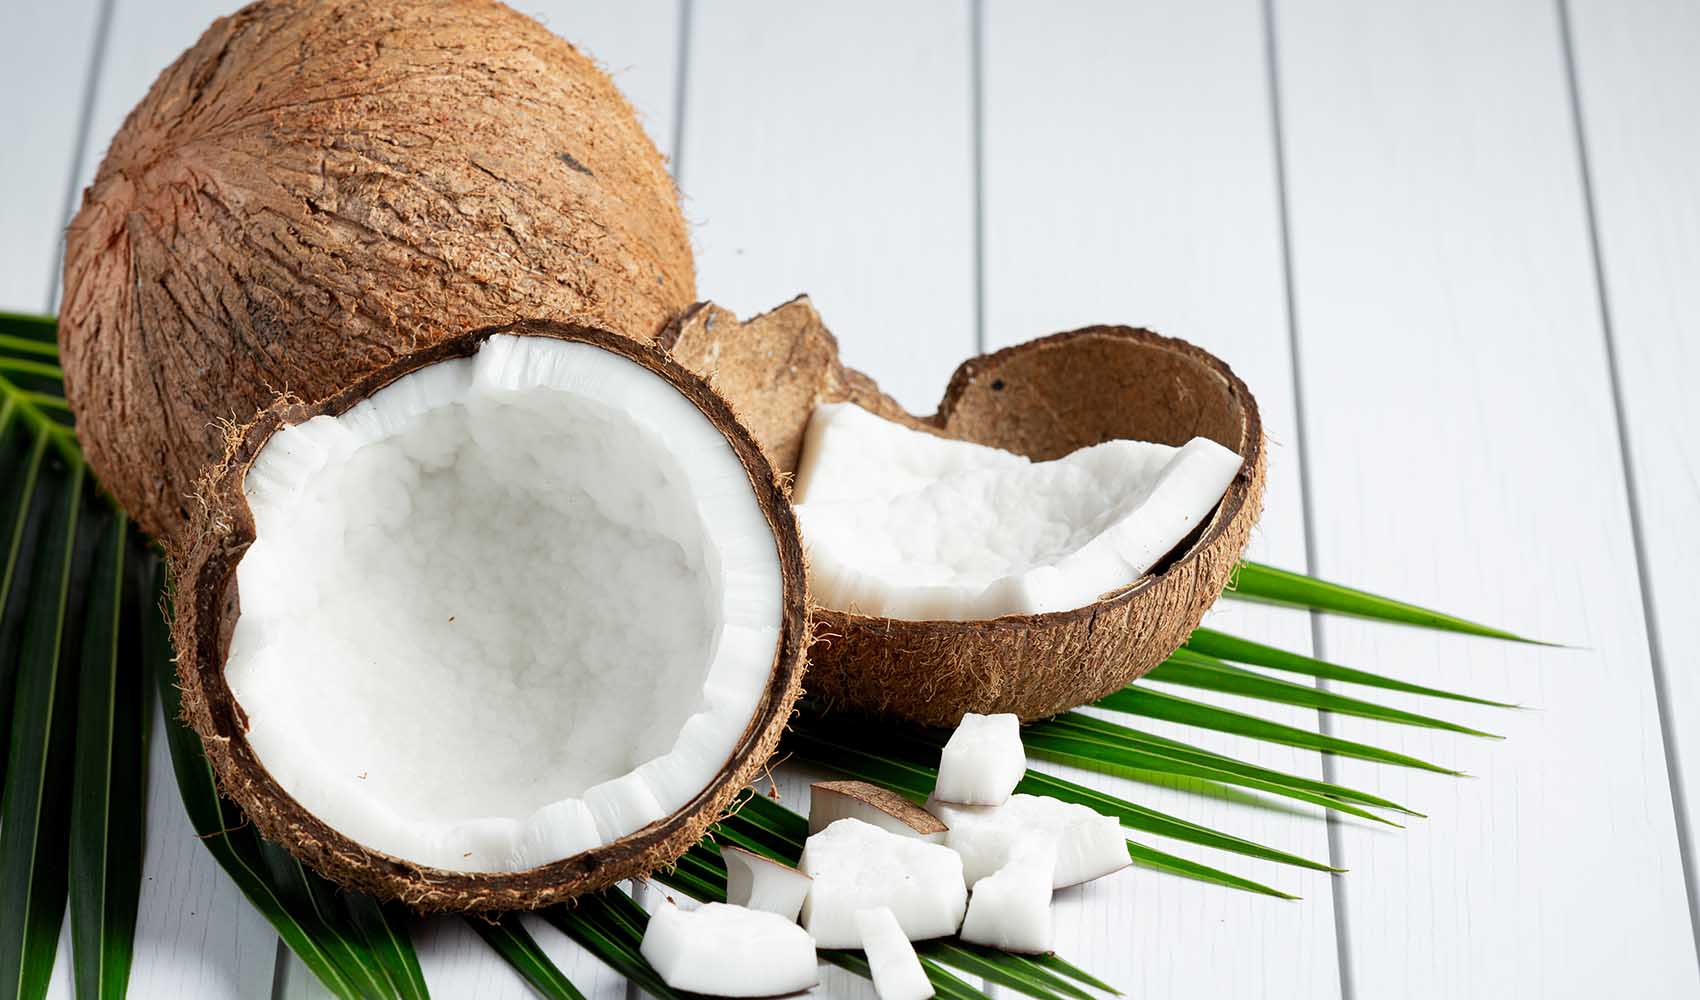 Dried-Coconut-Nutrition-Facts-Health-Benefits-and-Recipes-3